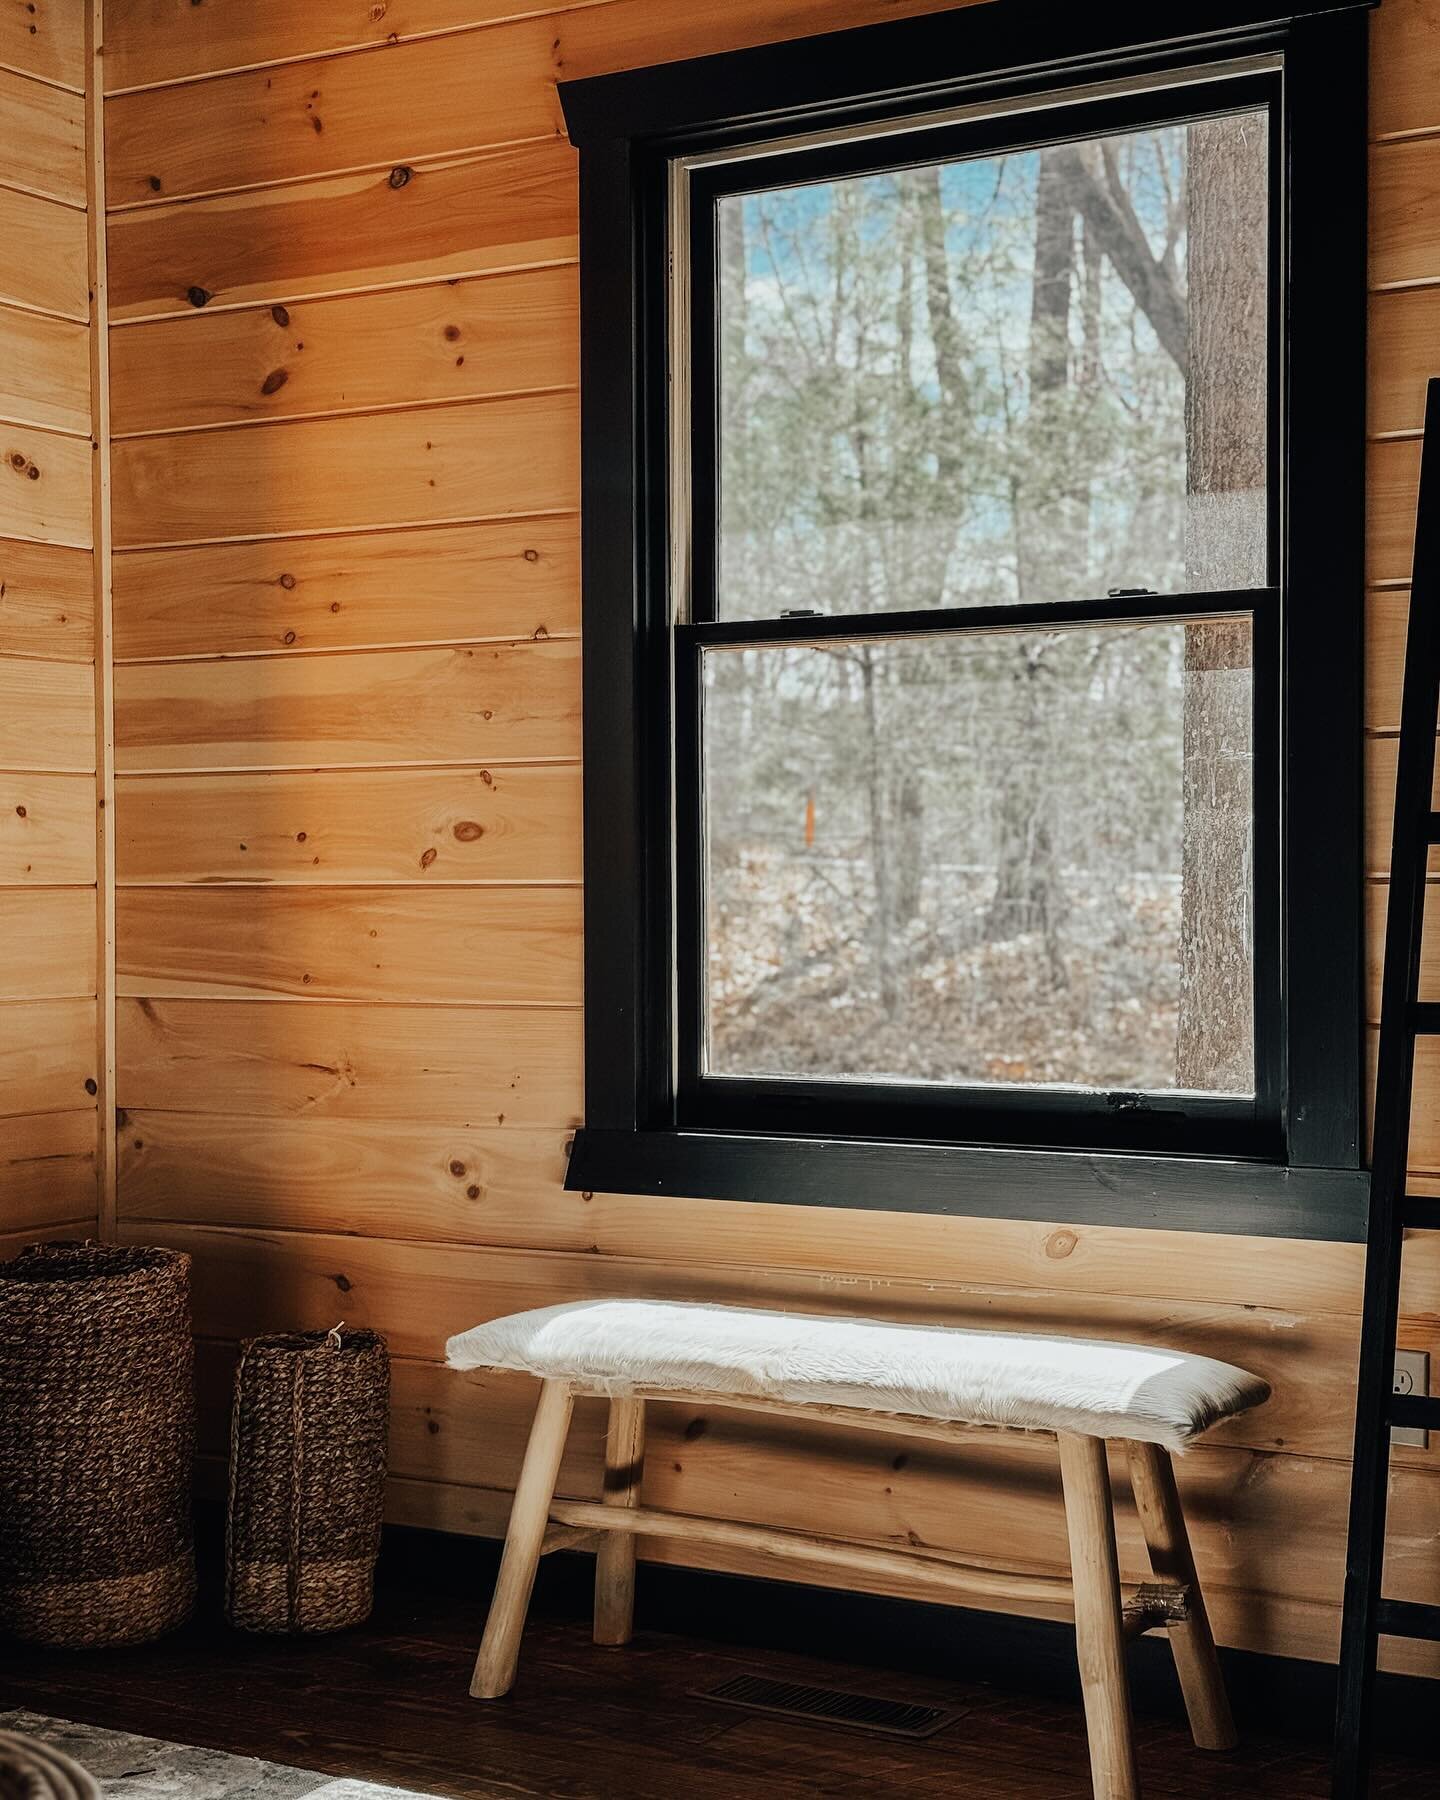 Coming soon ❤️ the cozy Scandinavian cabin of anyone&rsquo;s dreams. Our client bought this cabin with a vision and we&rsquo;re bringing it to life and soon to be available for rent minutes from town 
.
.
.
.
.
#cozycabin #blueridgemountains #getaway